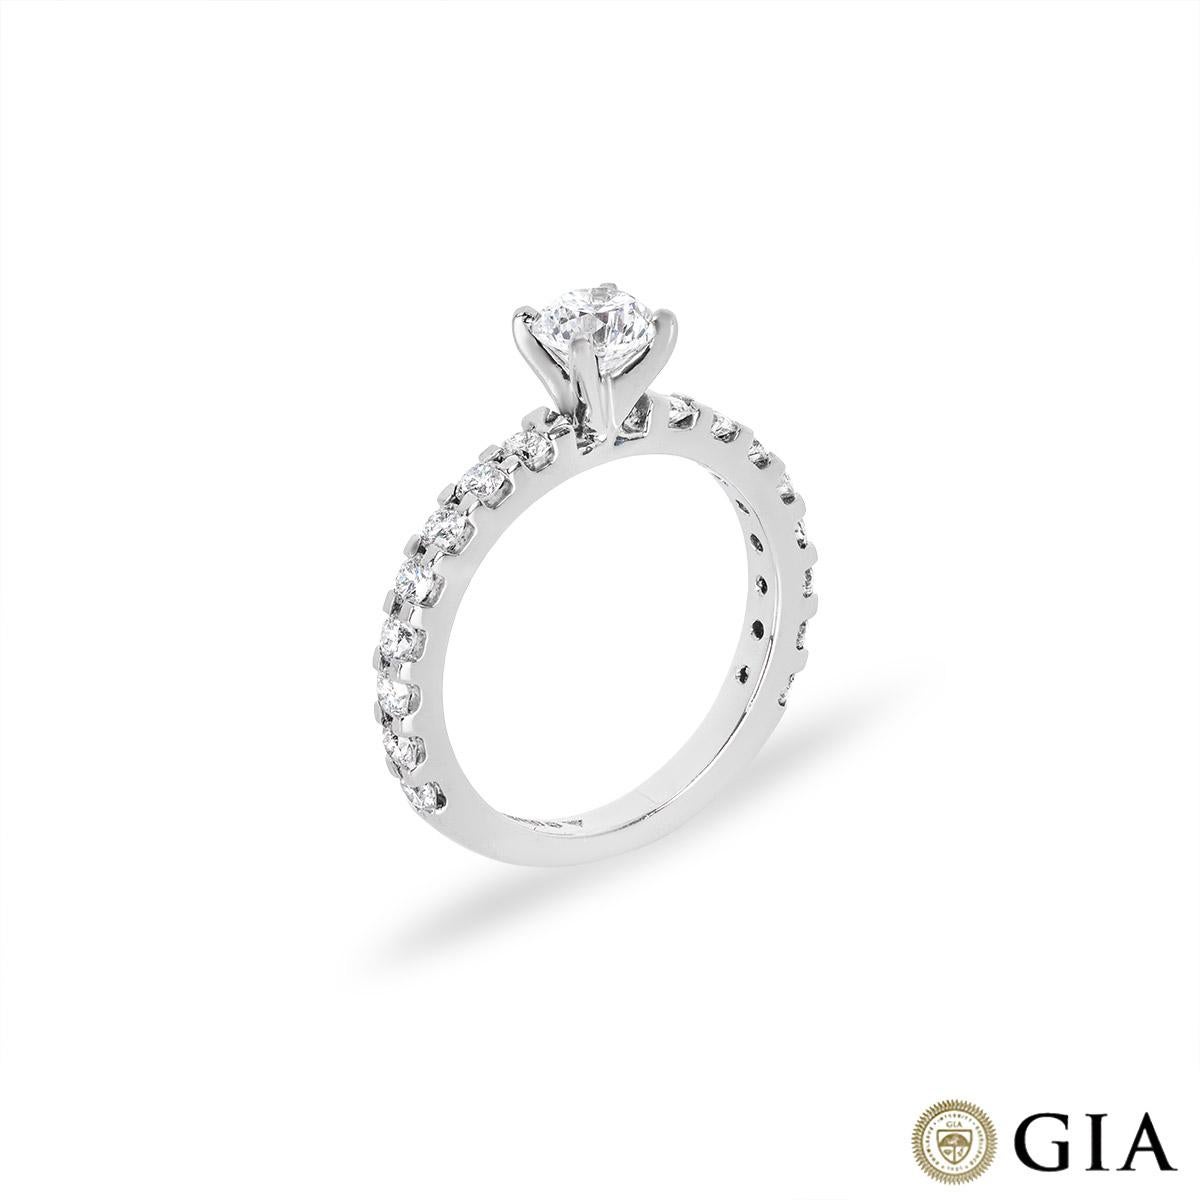 A classic platinum diamond engagement ring. The ring is set to the centre with a round brilliant cut diamond weighing 0.50ct, D colour and VS1 clarity. Accentuating the centre diamond are 16 round brilliant cut diamonds set to the shoulders with an